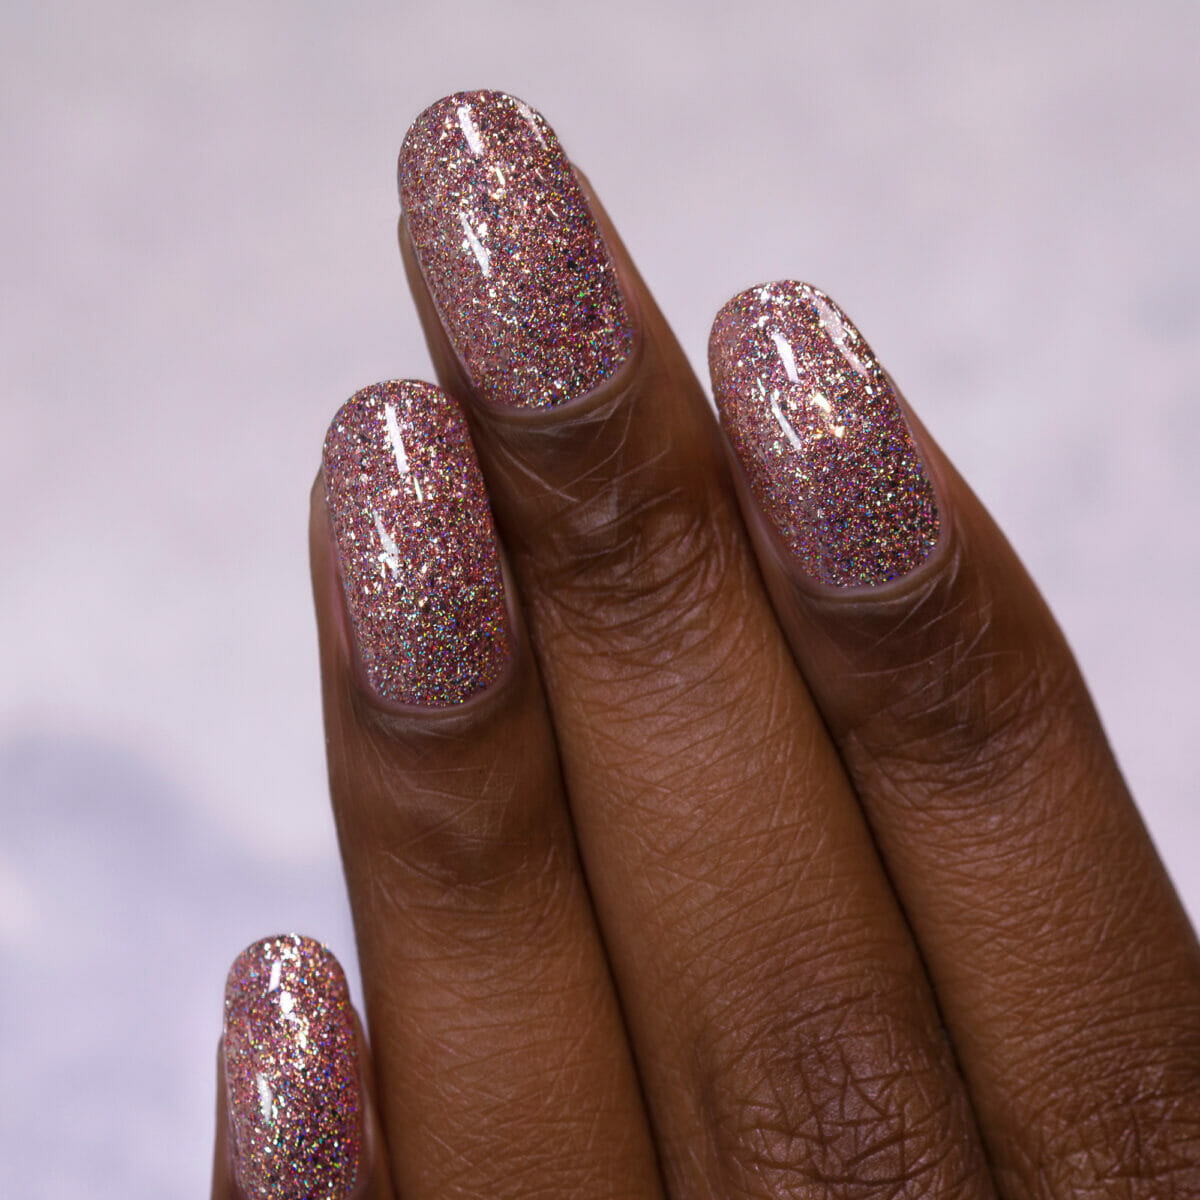 Juliette - Rose Gold Holographic Ultra Metallic Nail Polish by ILNP